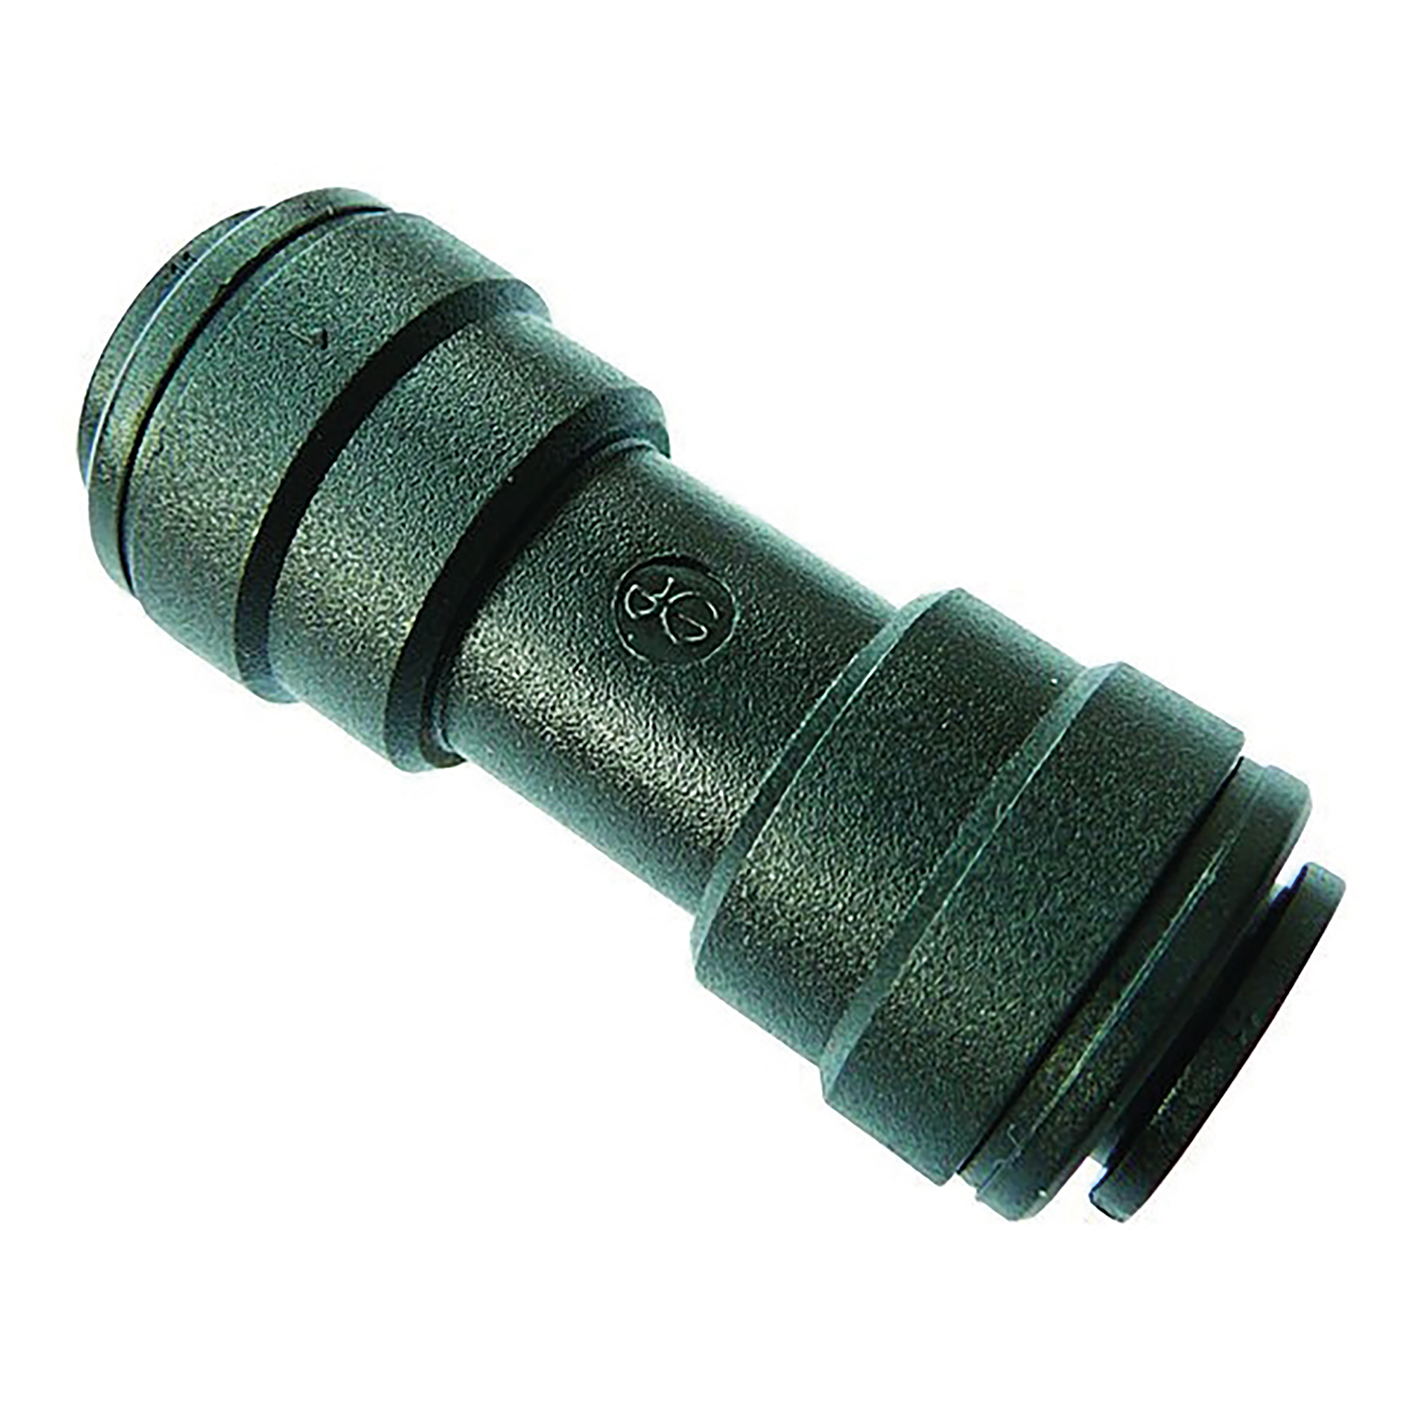 10mm OD Straight Connector